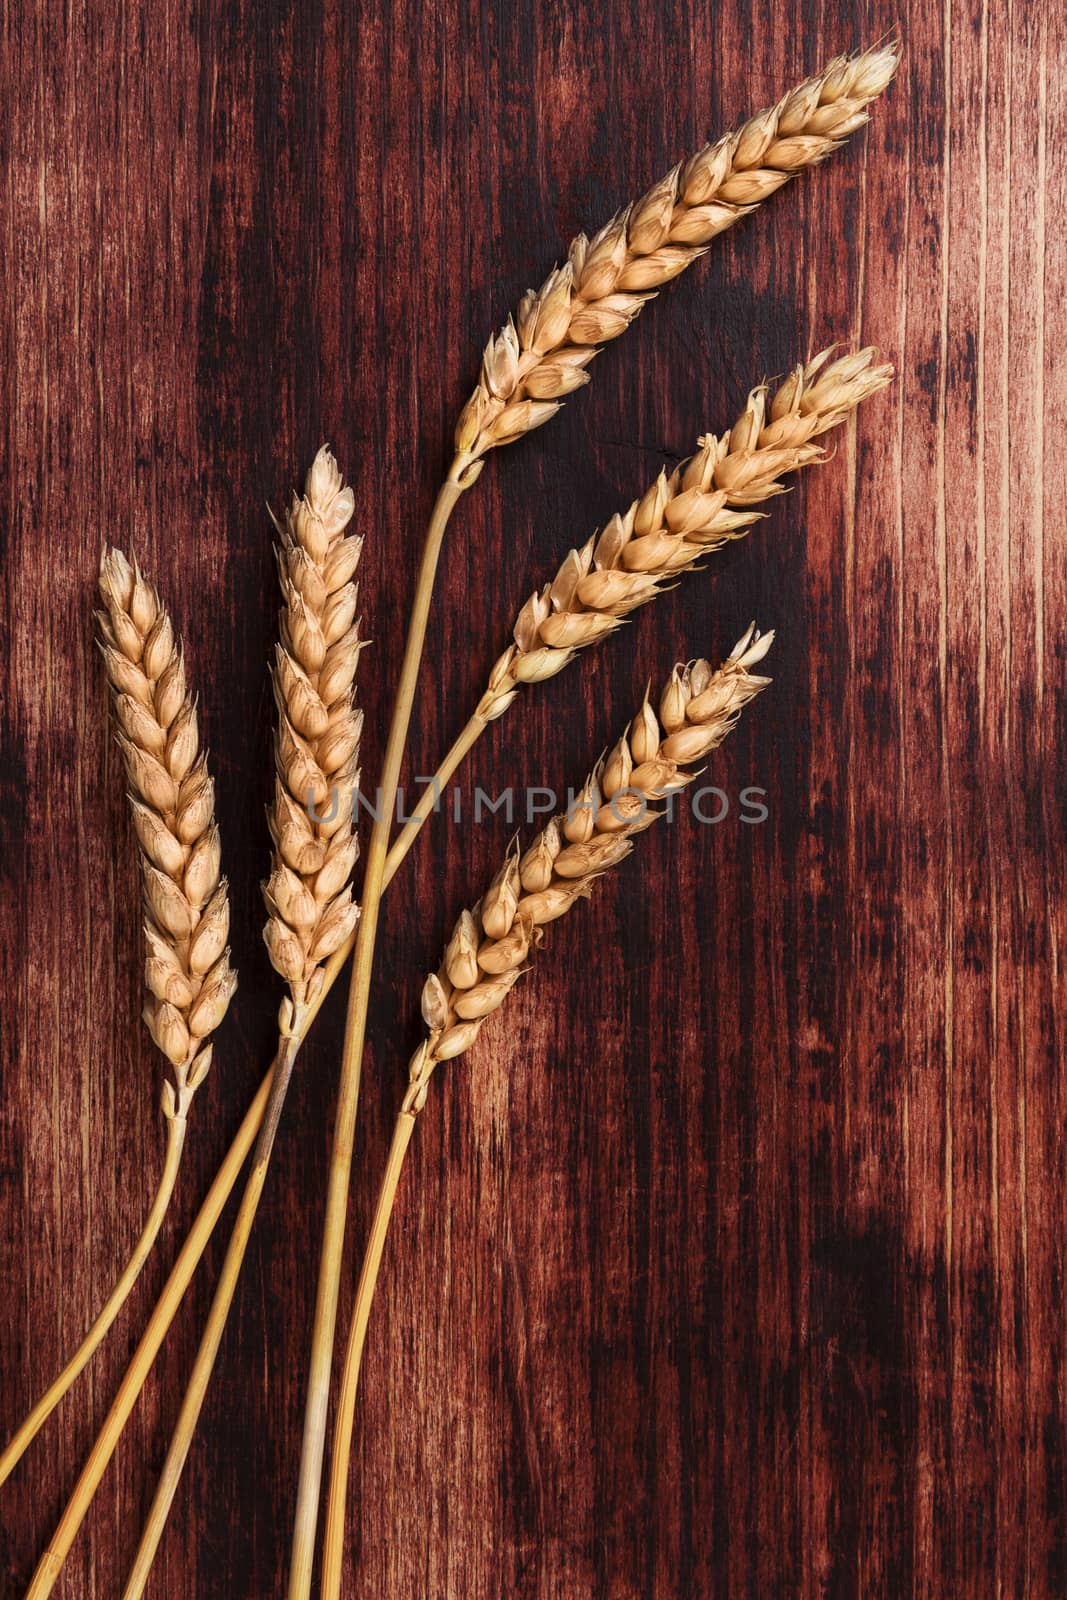 Dried barley on brown wooden background, top view. Organic cereal crop. Agricultural background with copy space.  